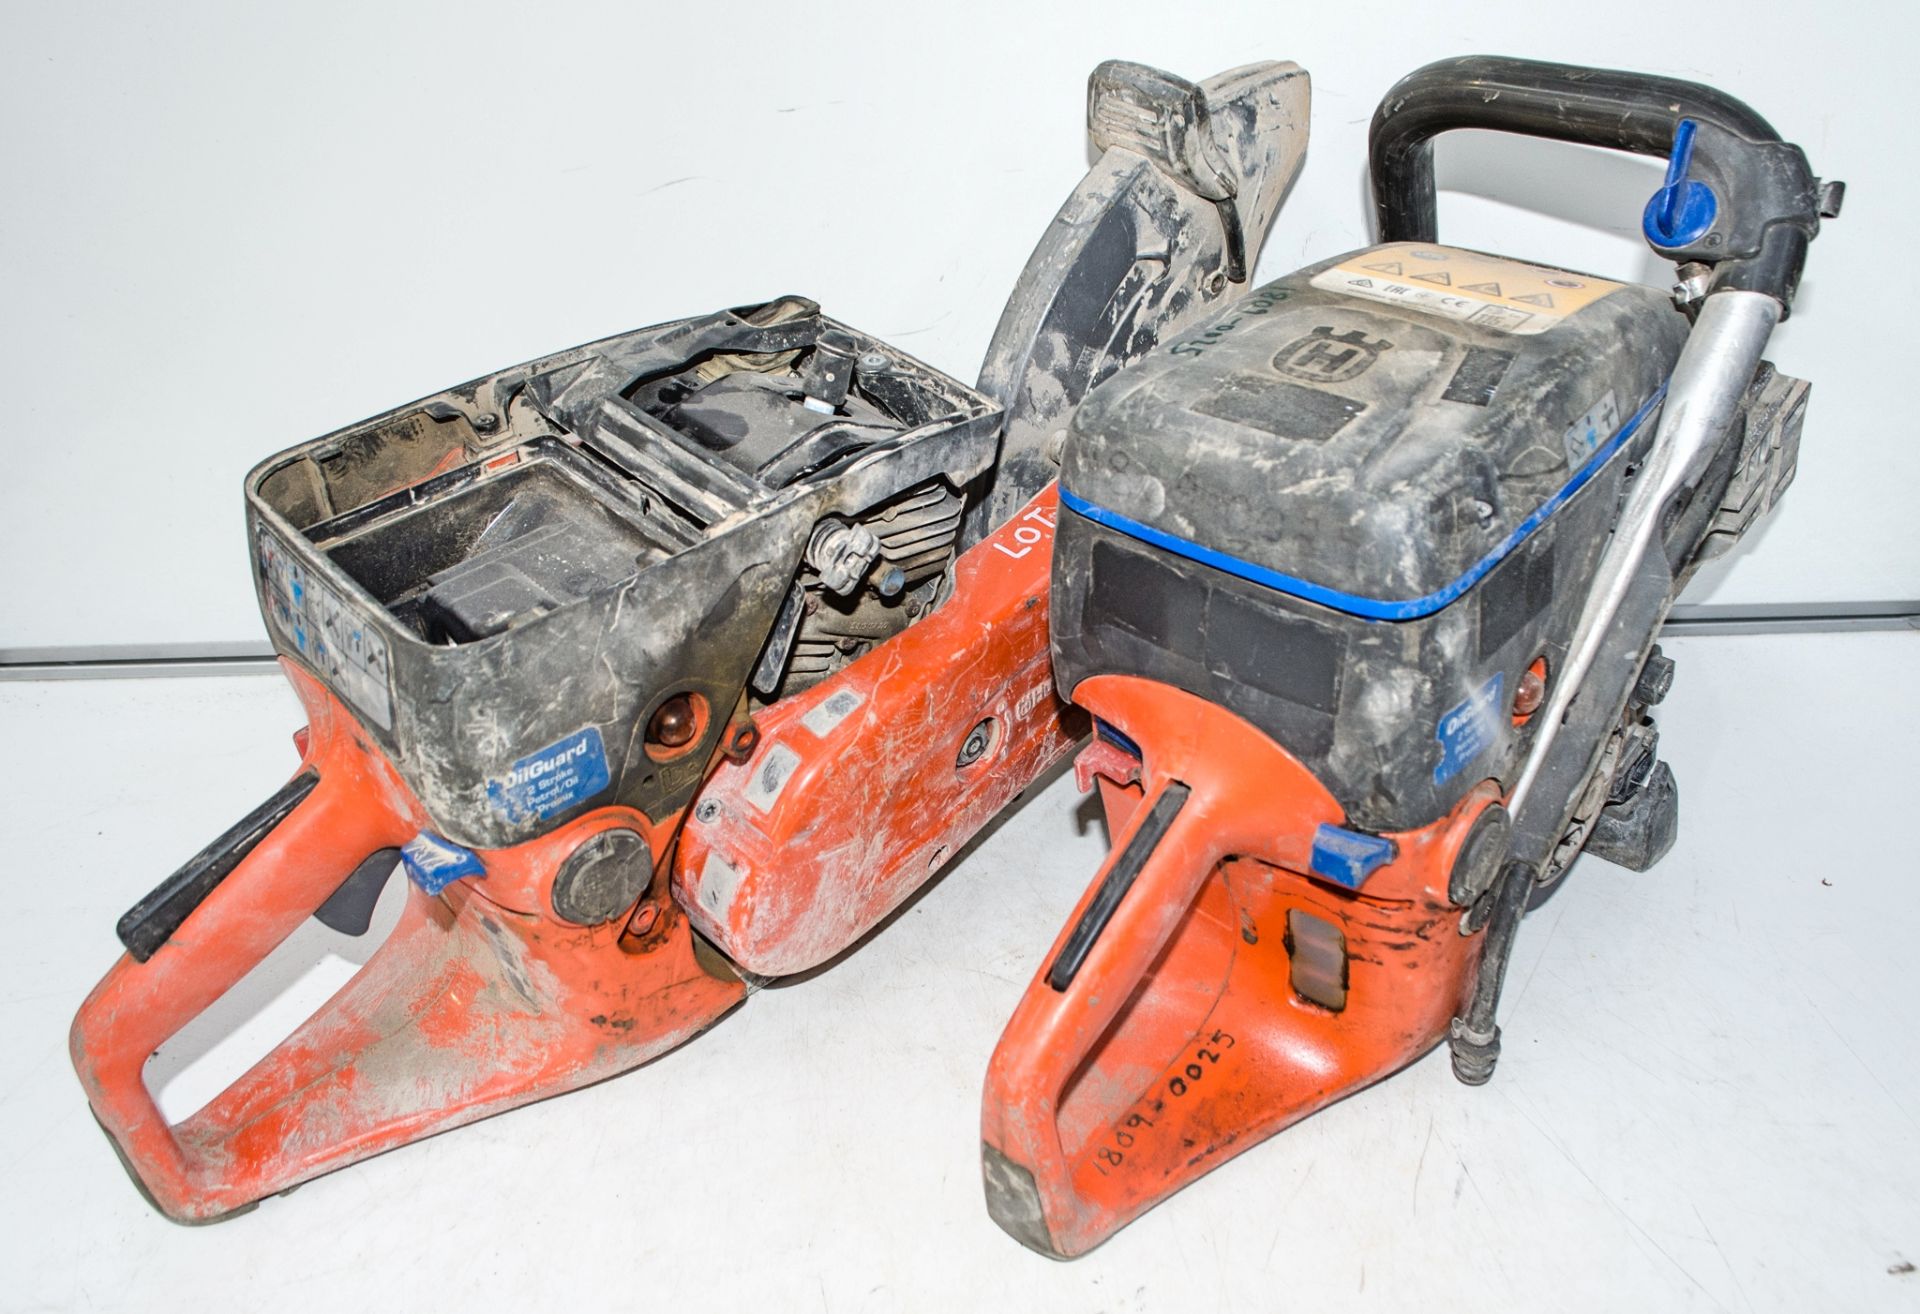 2 - Husqvarna K770 petrol driven cut off saws ** Both for spares ** 11017473, 18090025 - Image 2 of 2